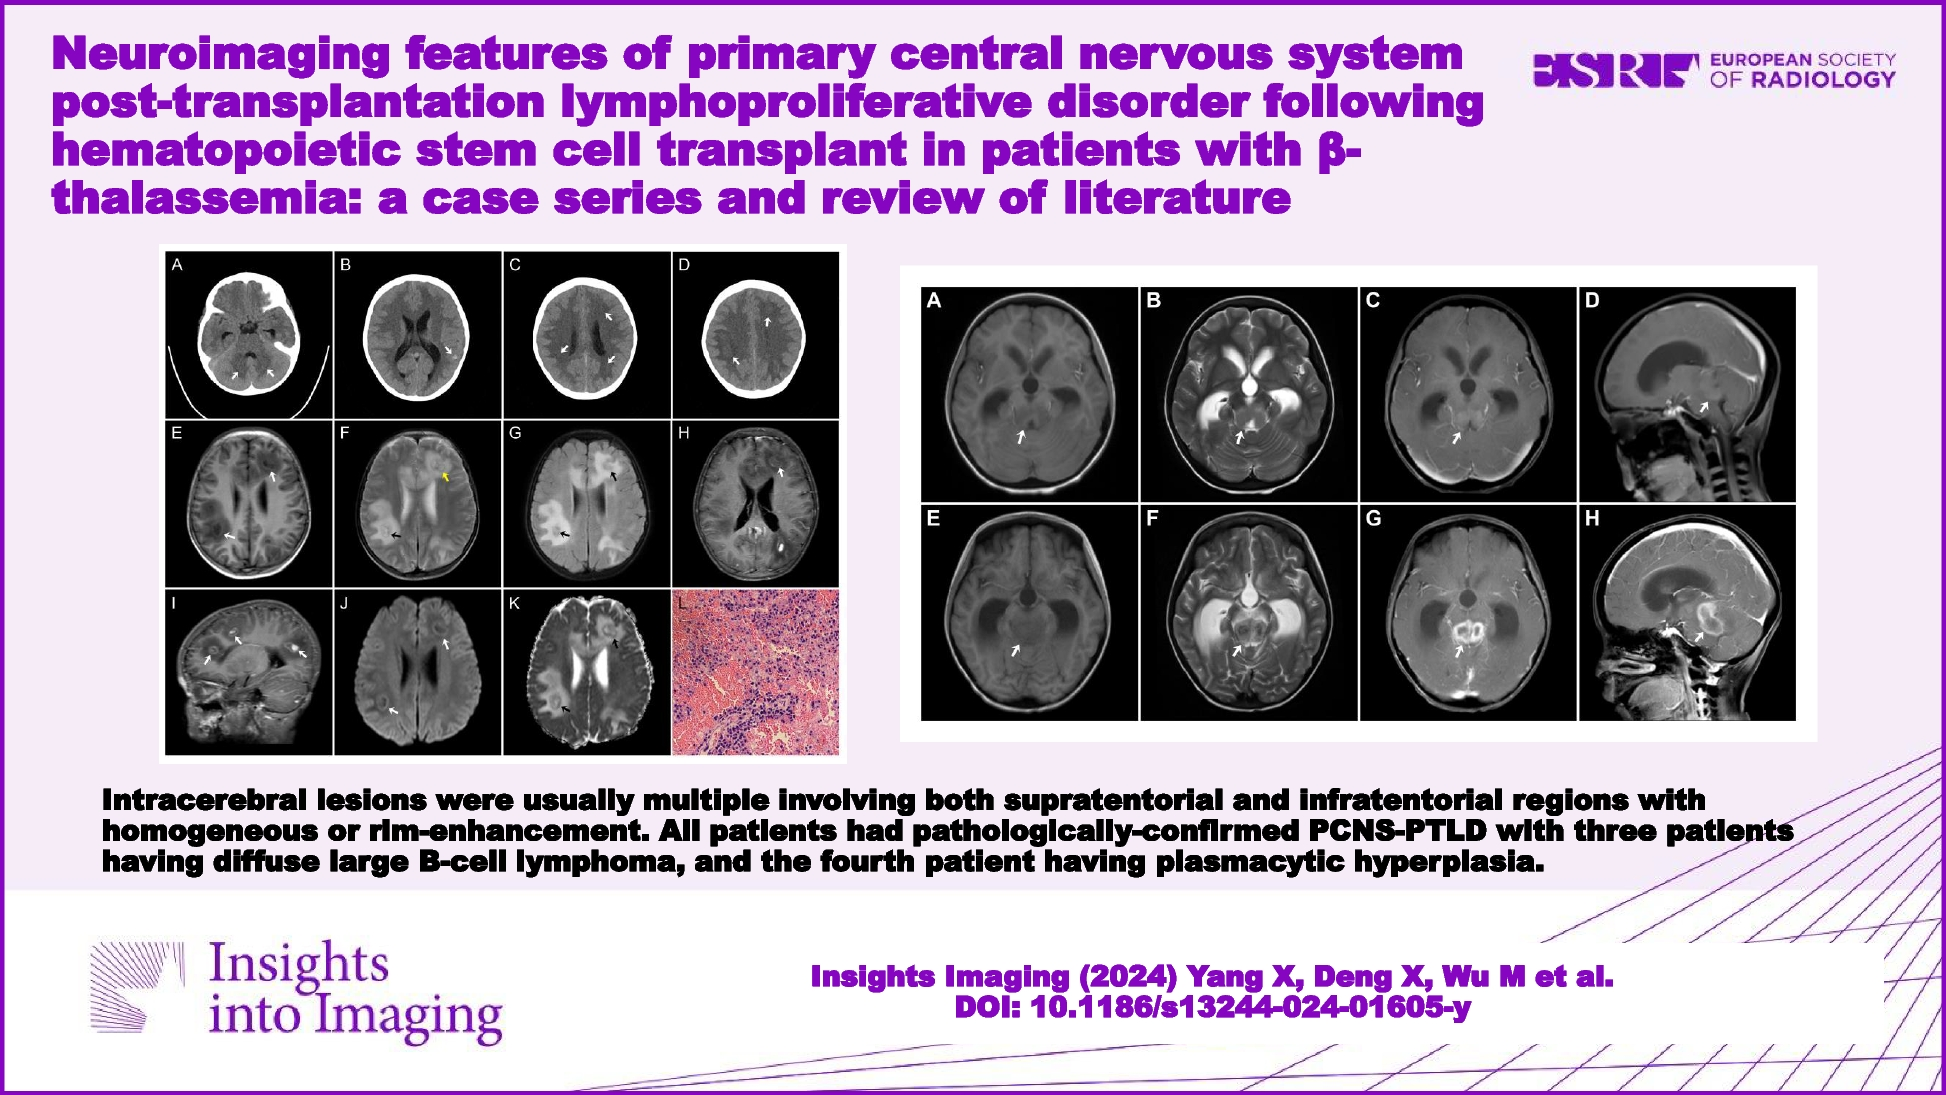 Neuroimaging features of primary central nervous system post-transplantation lymphoproliferative disorder following hematopoietic stem cell transplant in patients with β-thalassemia: a case series and review of literature